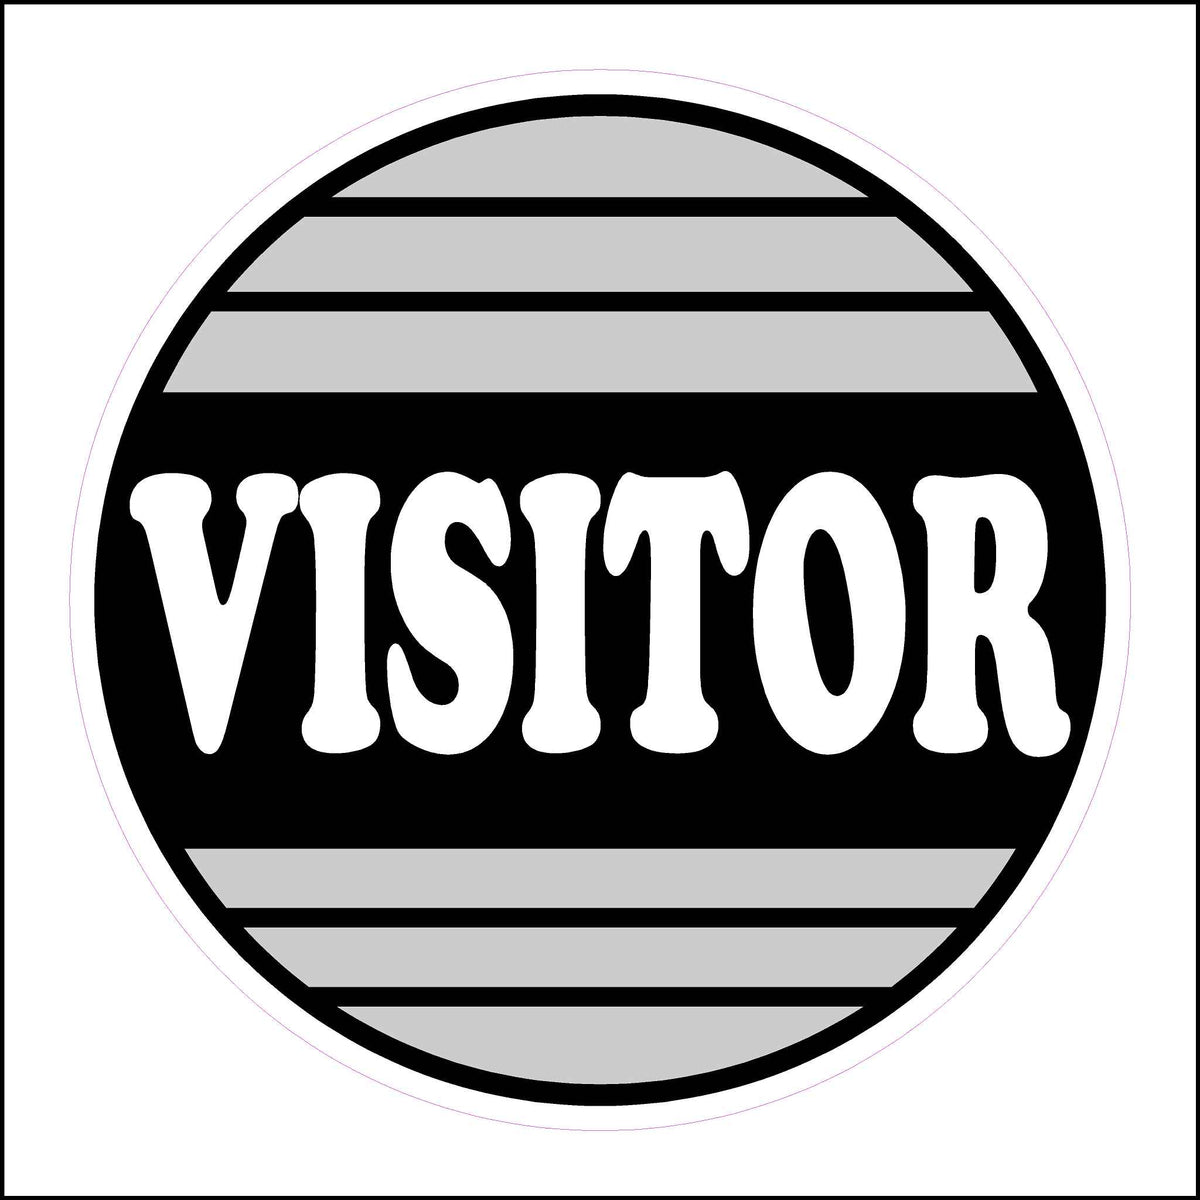 2 inch in diameter visitor sticker printed in gray, black and white.